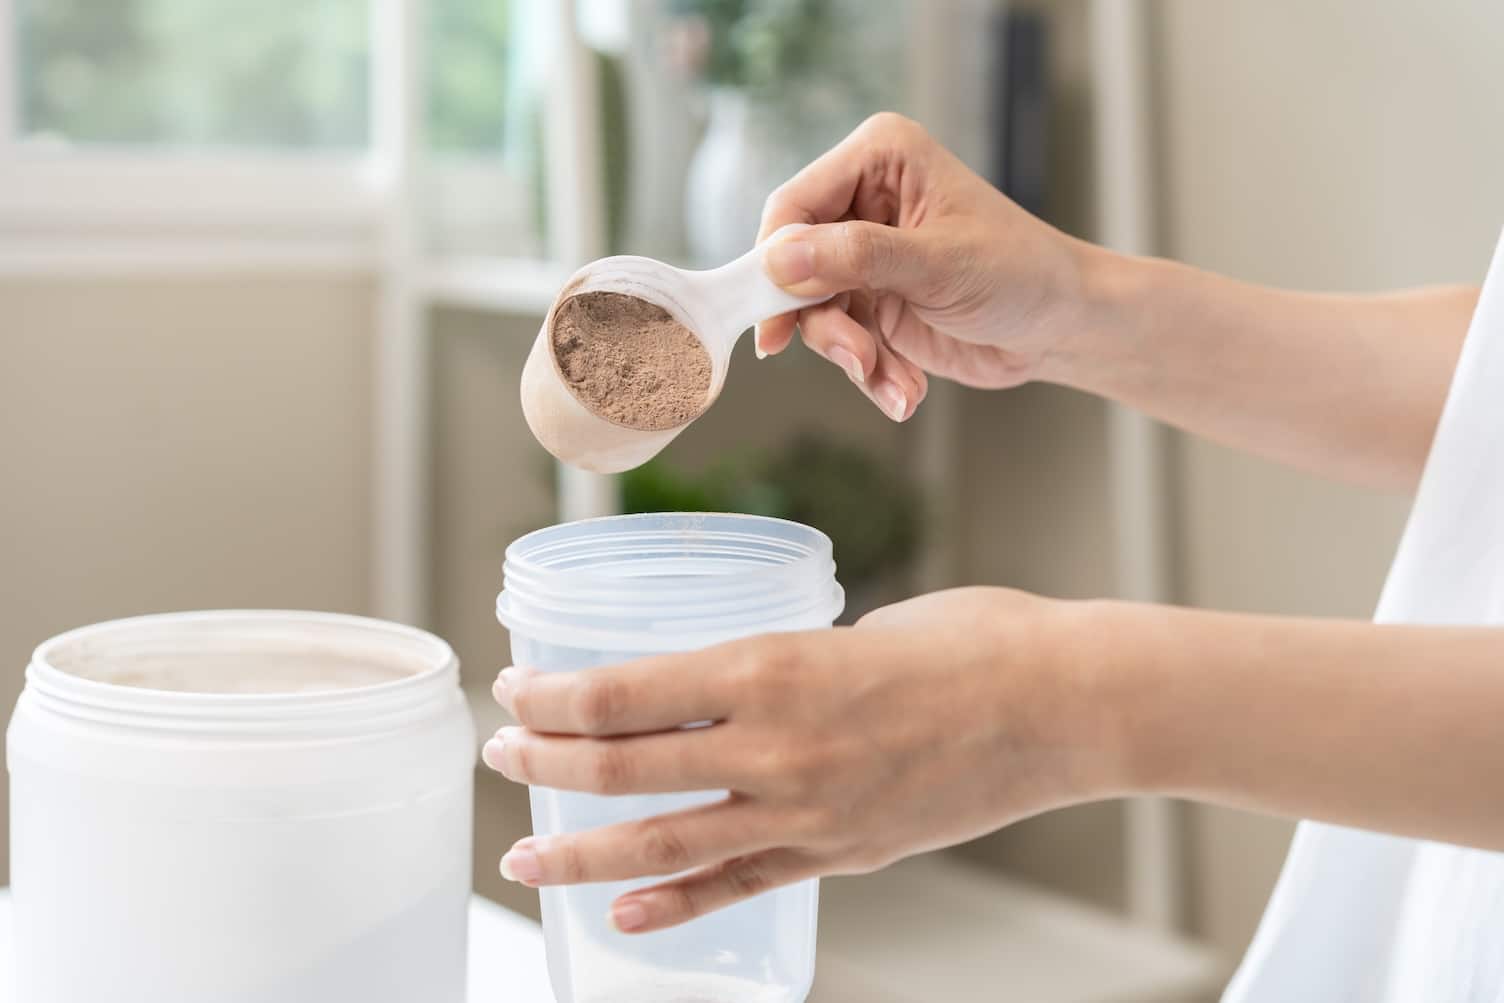 The 5 Best Protein Powders According to a Dietitian